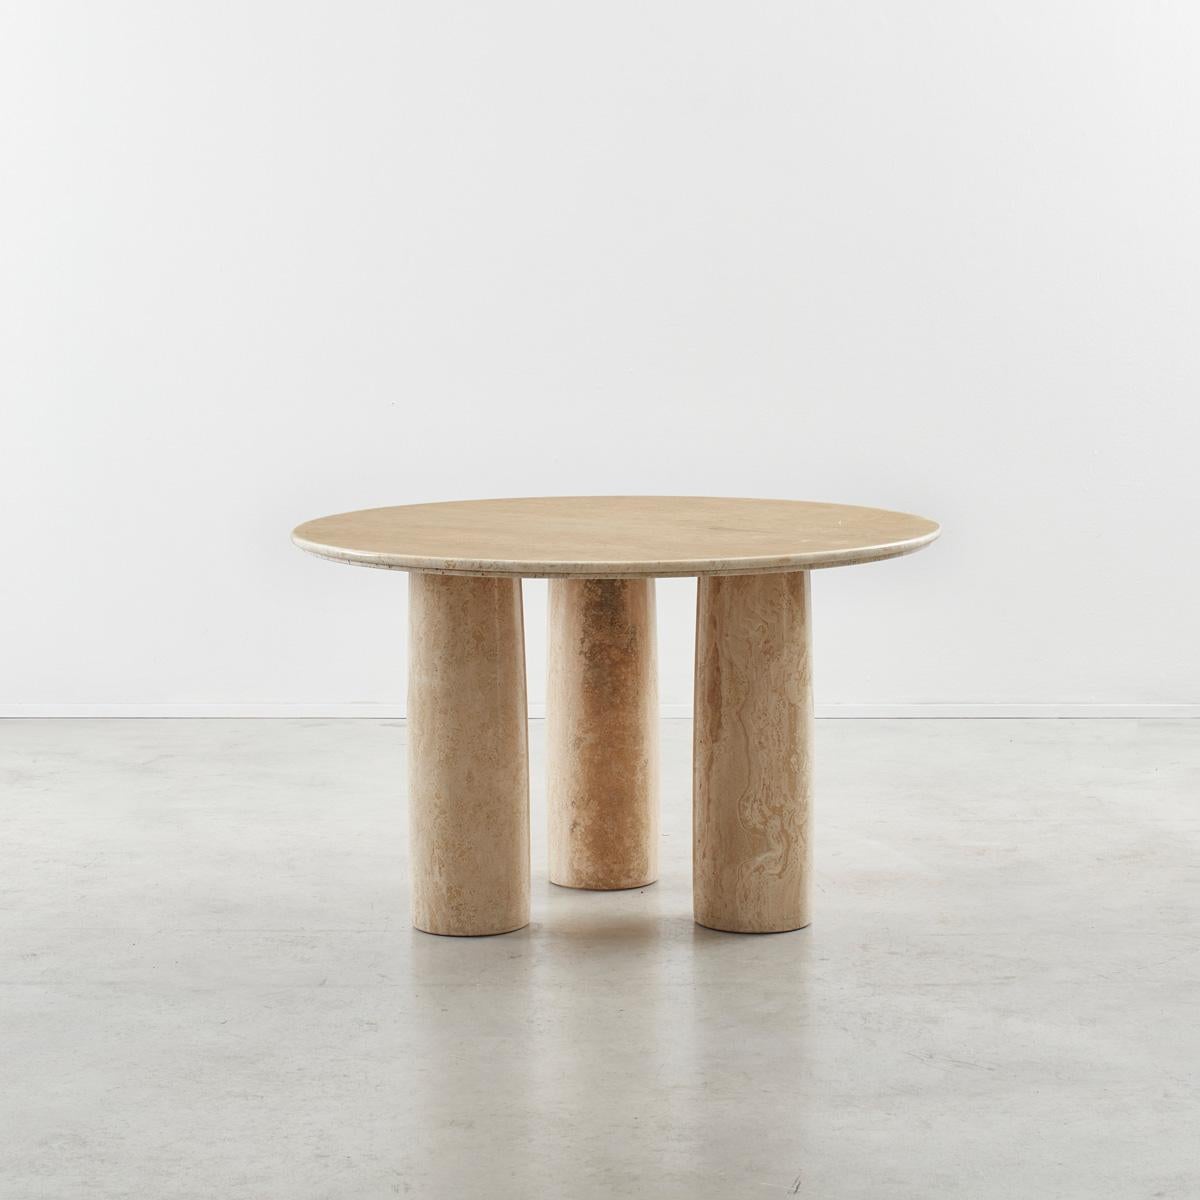 Large round Il Colonnato table, designed by Milanese architect Mario Bellini. The table is a sought after piece, perhaps due to the monumental presence it commands within a space. Minimal in design, with five column legs, it is constructed entirely